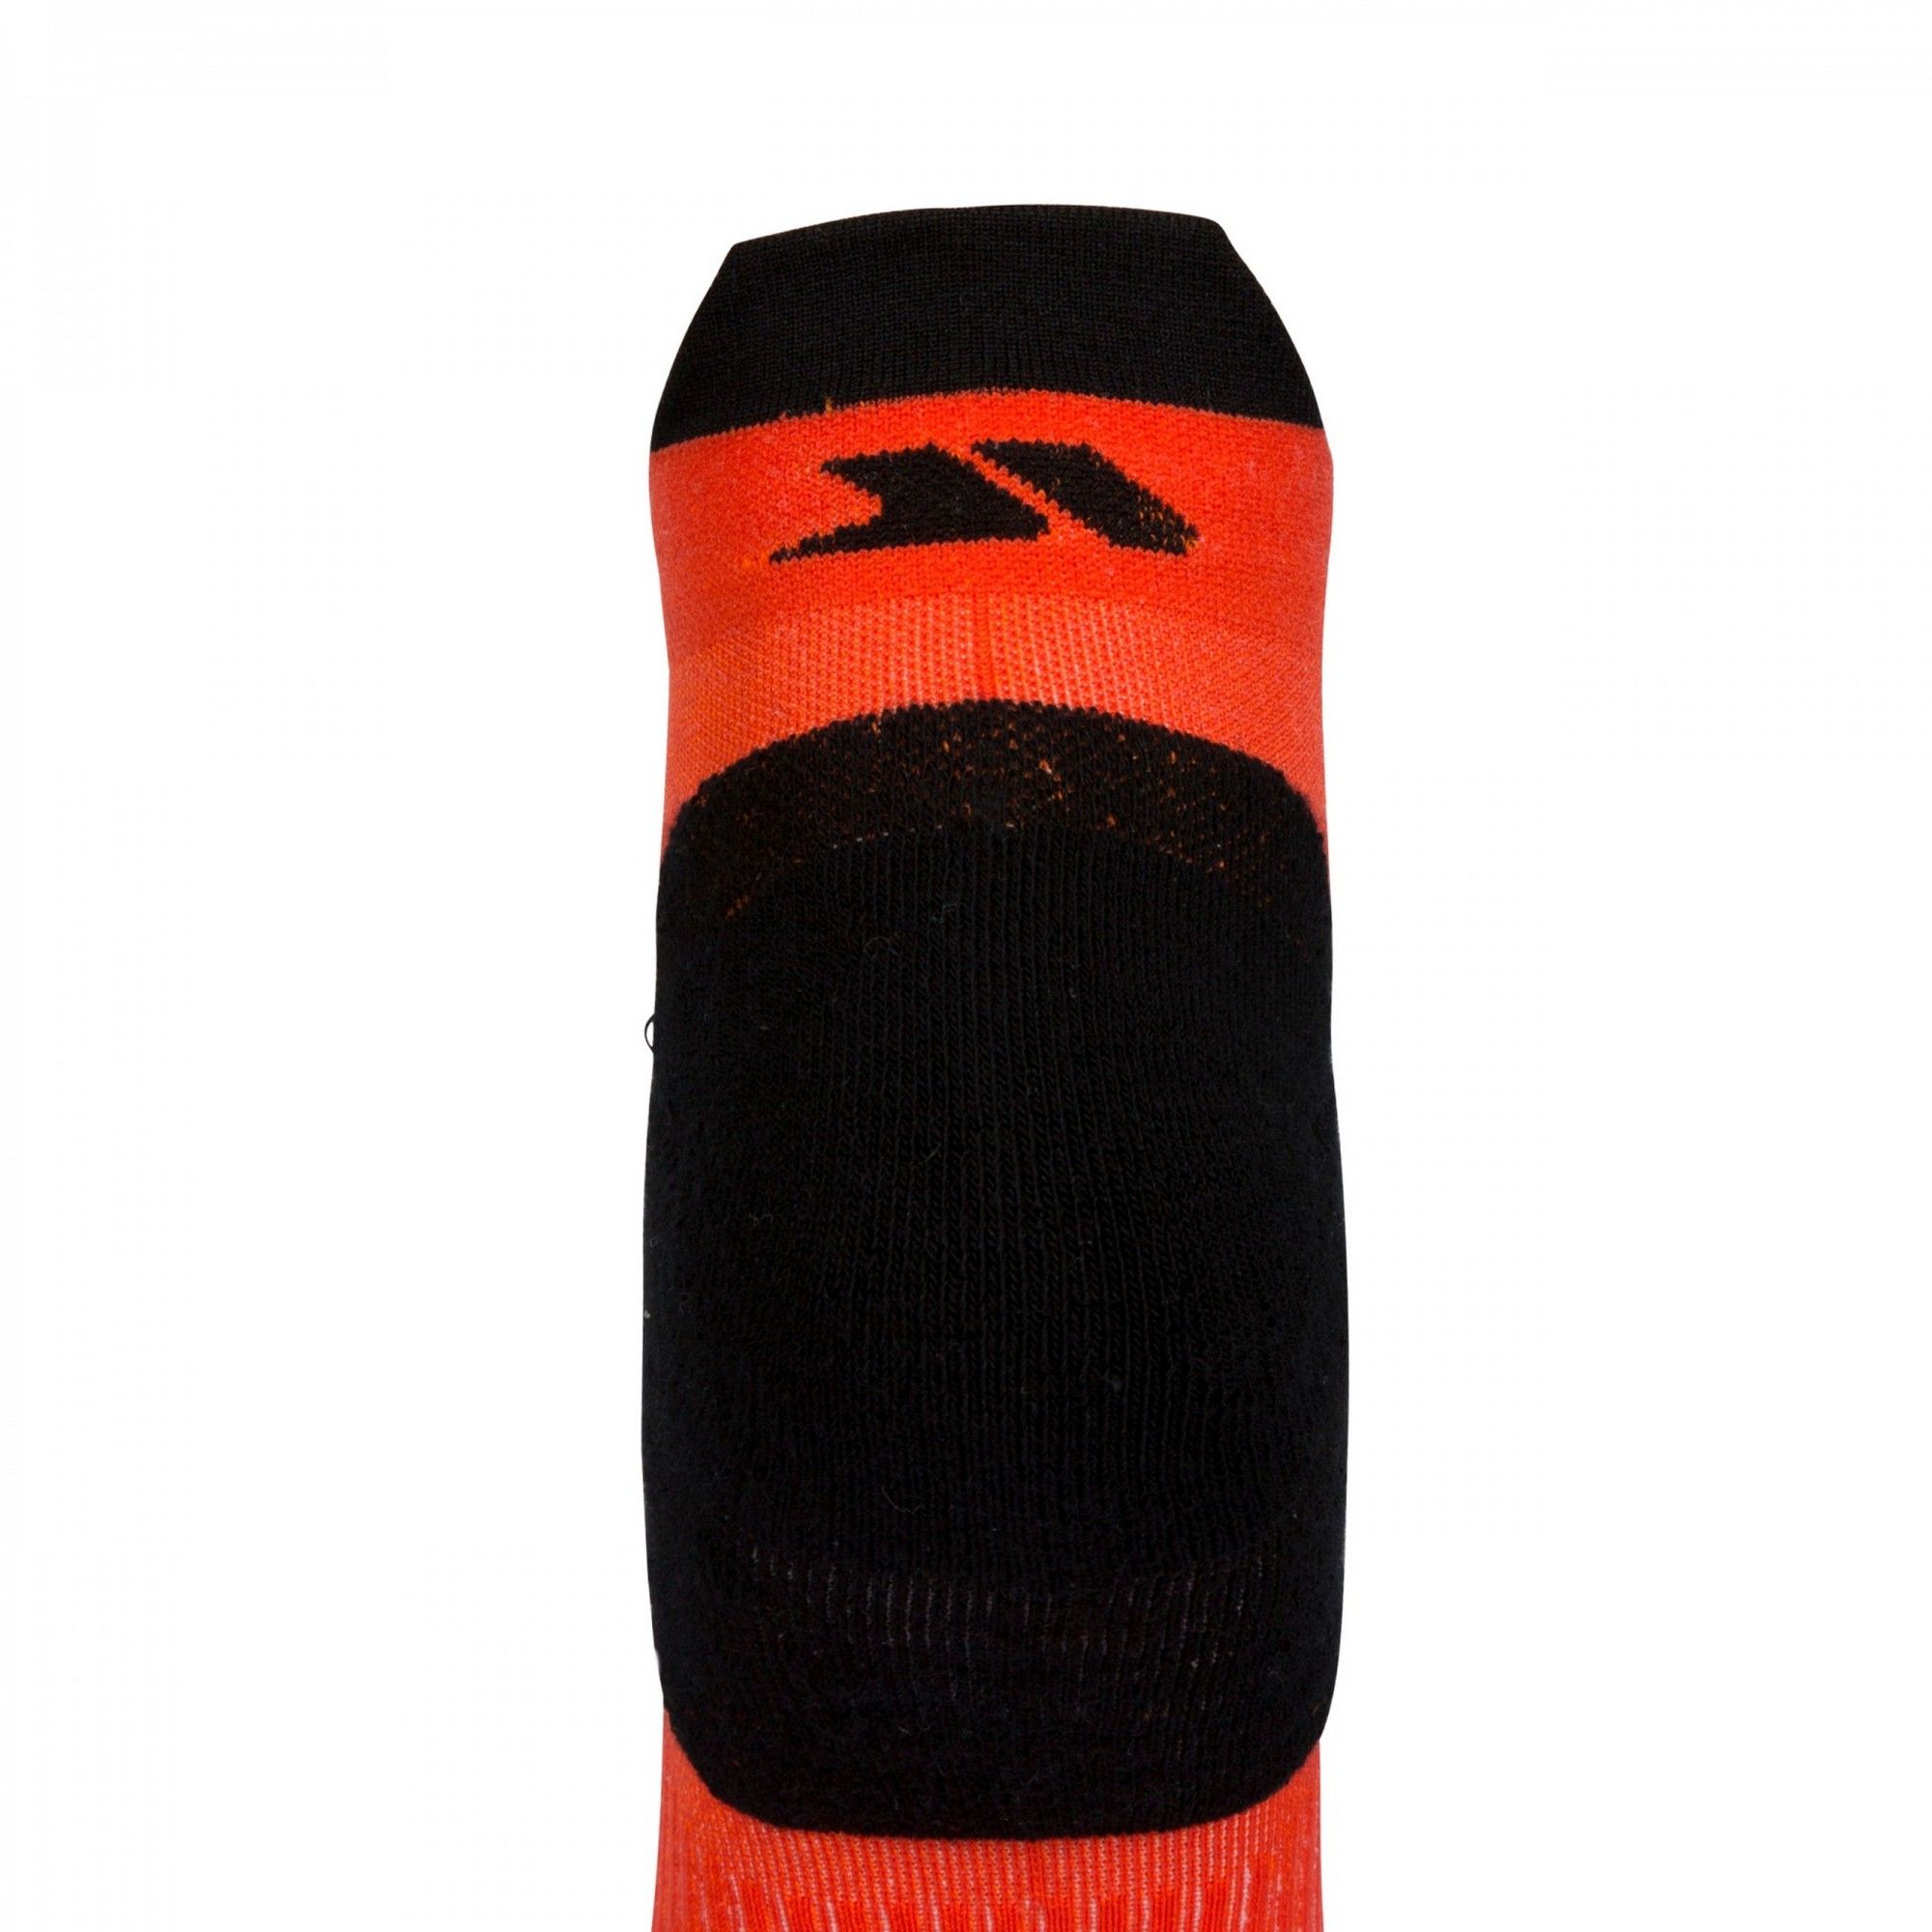 Impact protection trainer socks. Cushioned heel and toe. Arch support. Breathable mesh. 39% Cotton, 30% Polyester, 25% Polyamide, 6% Elastane.